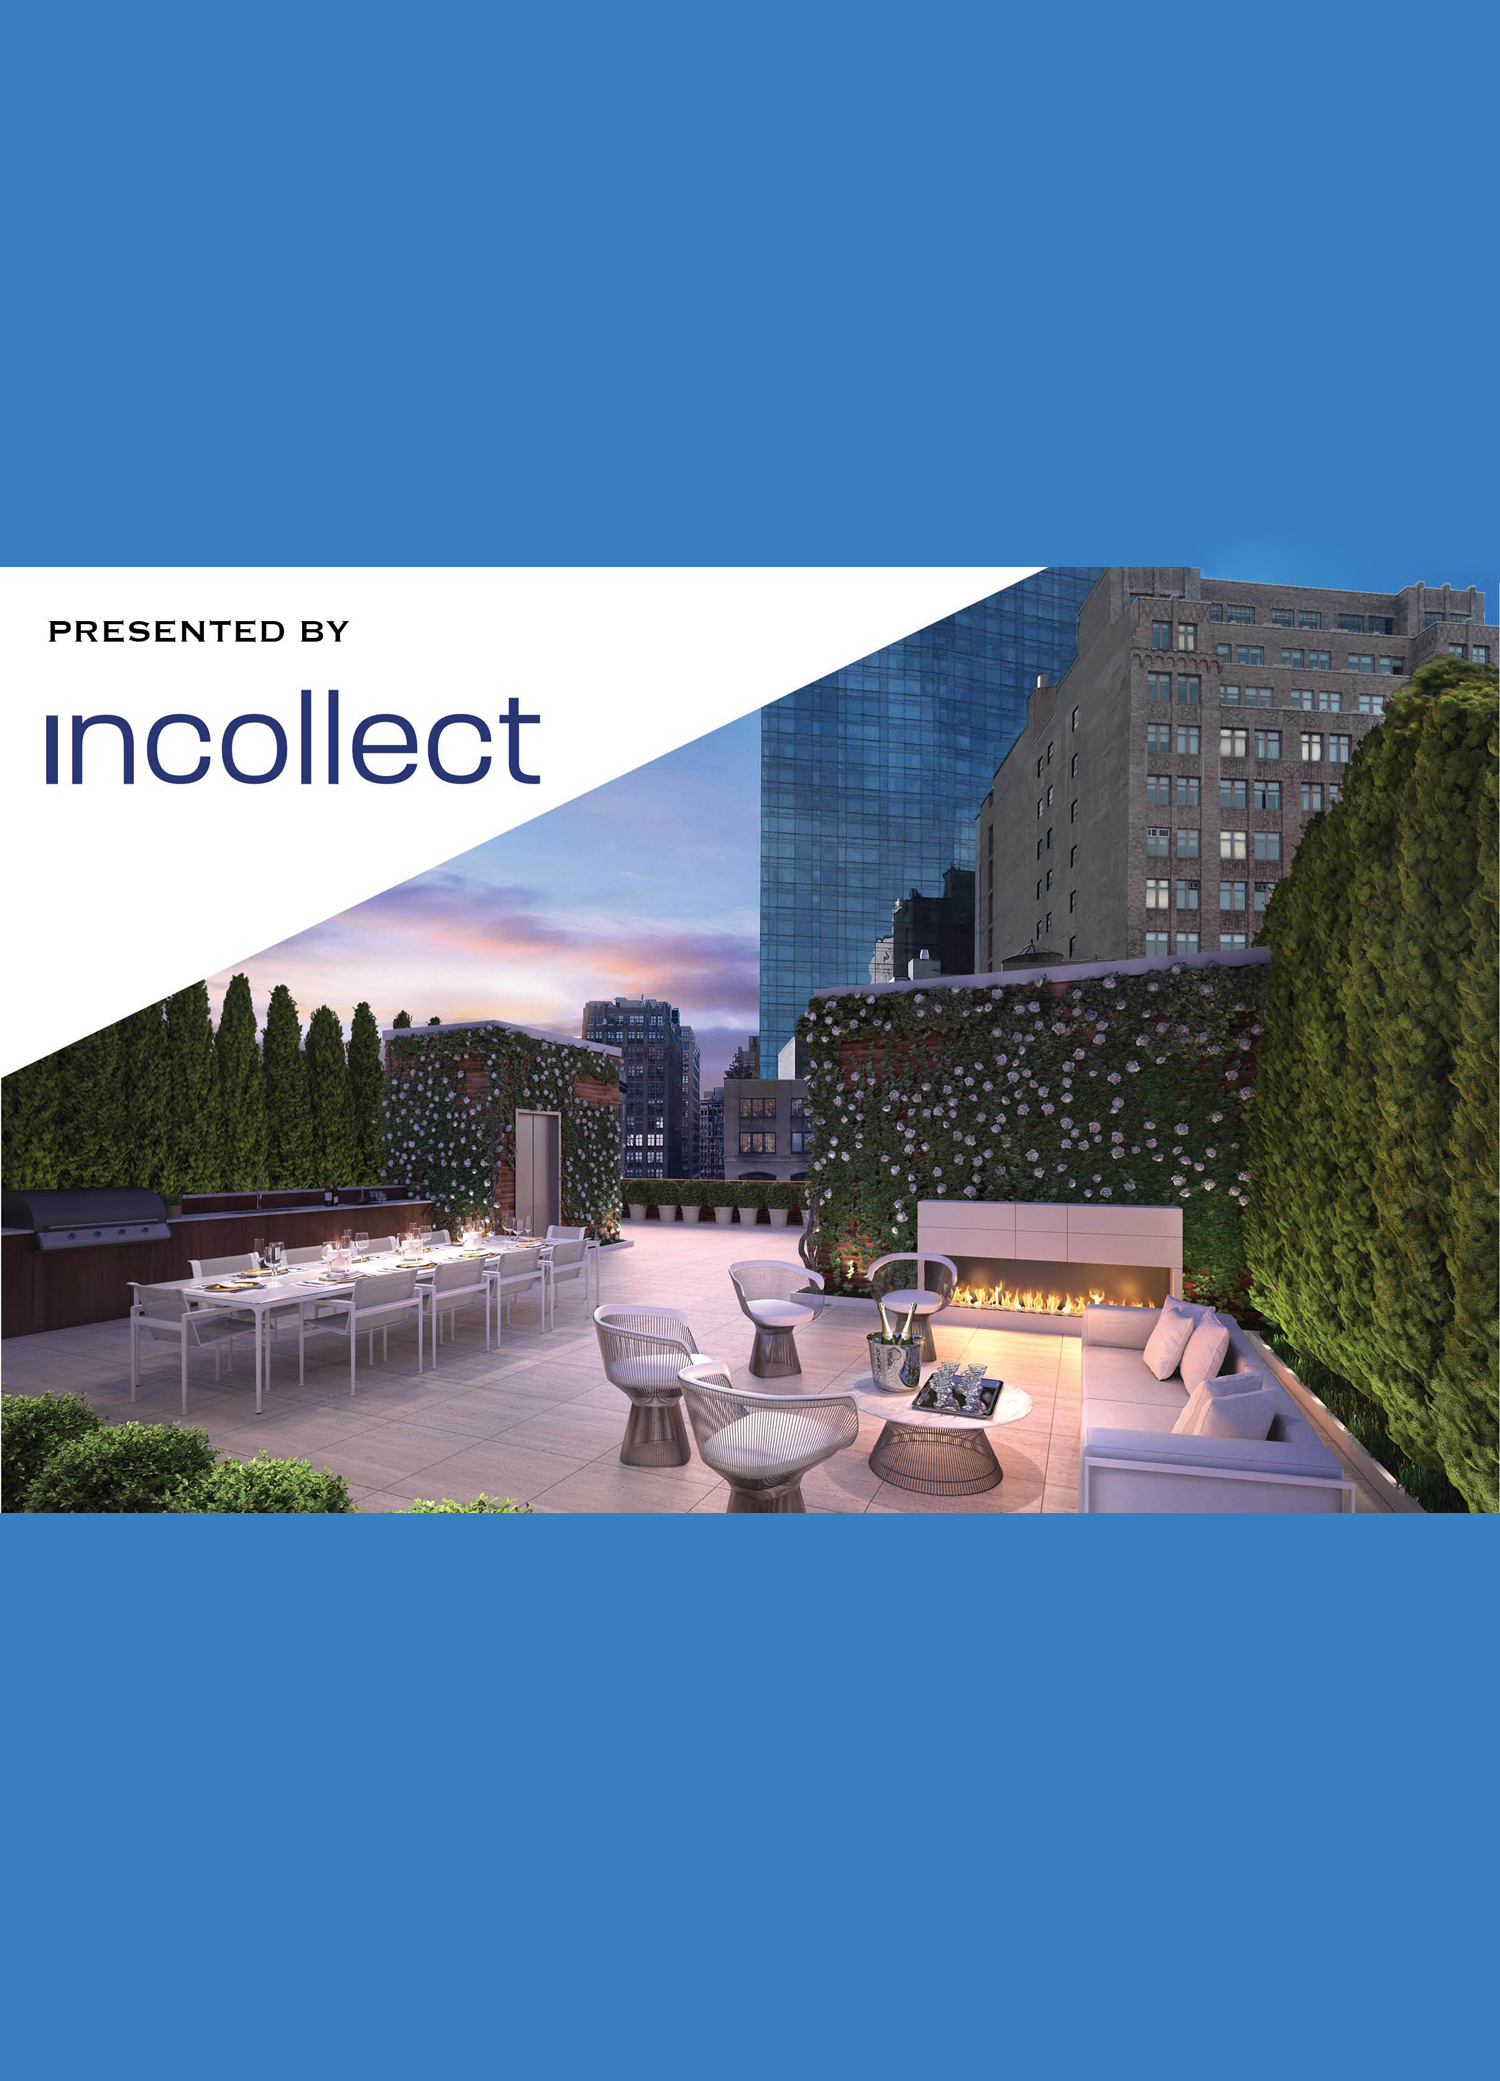 Incollect-Banner 4.jpg